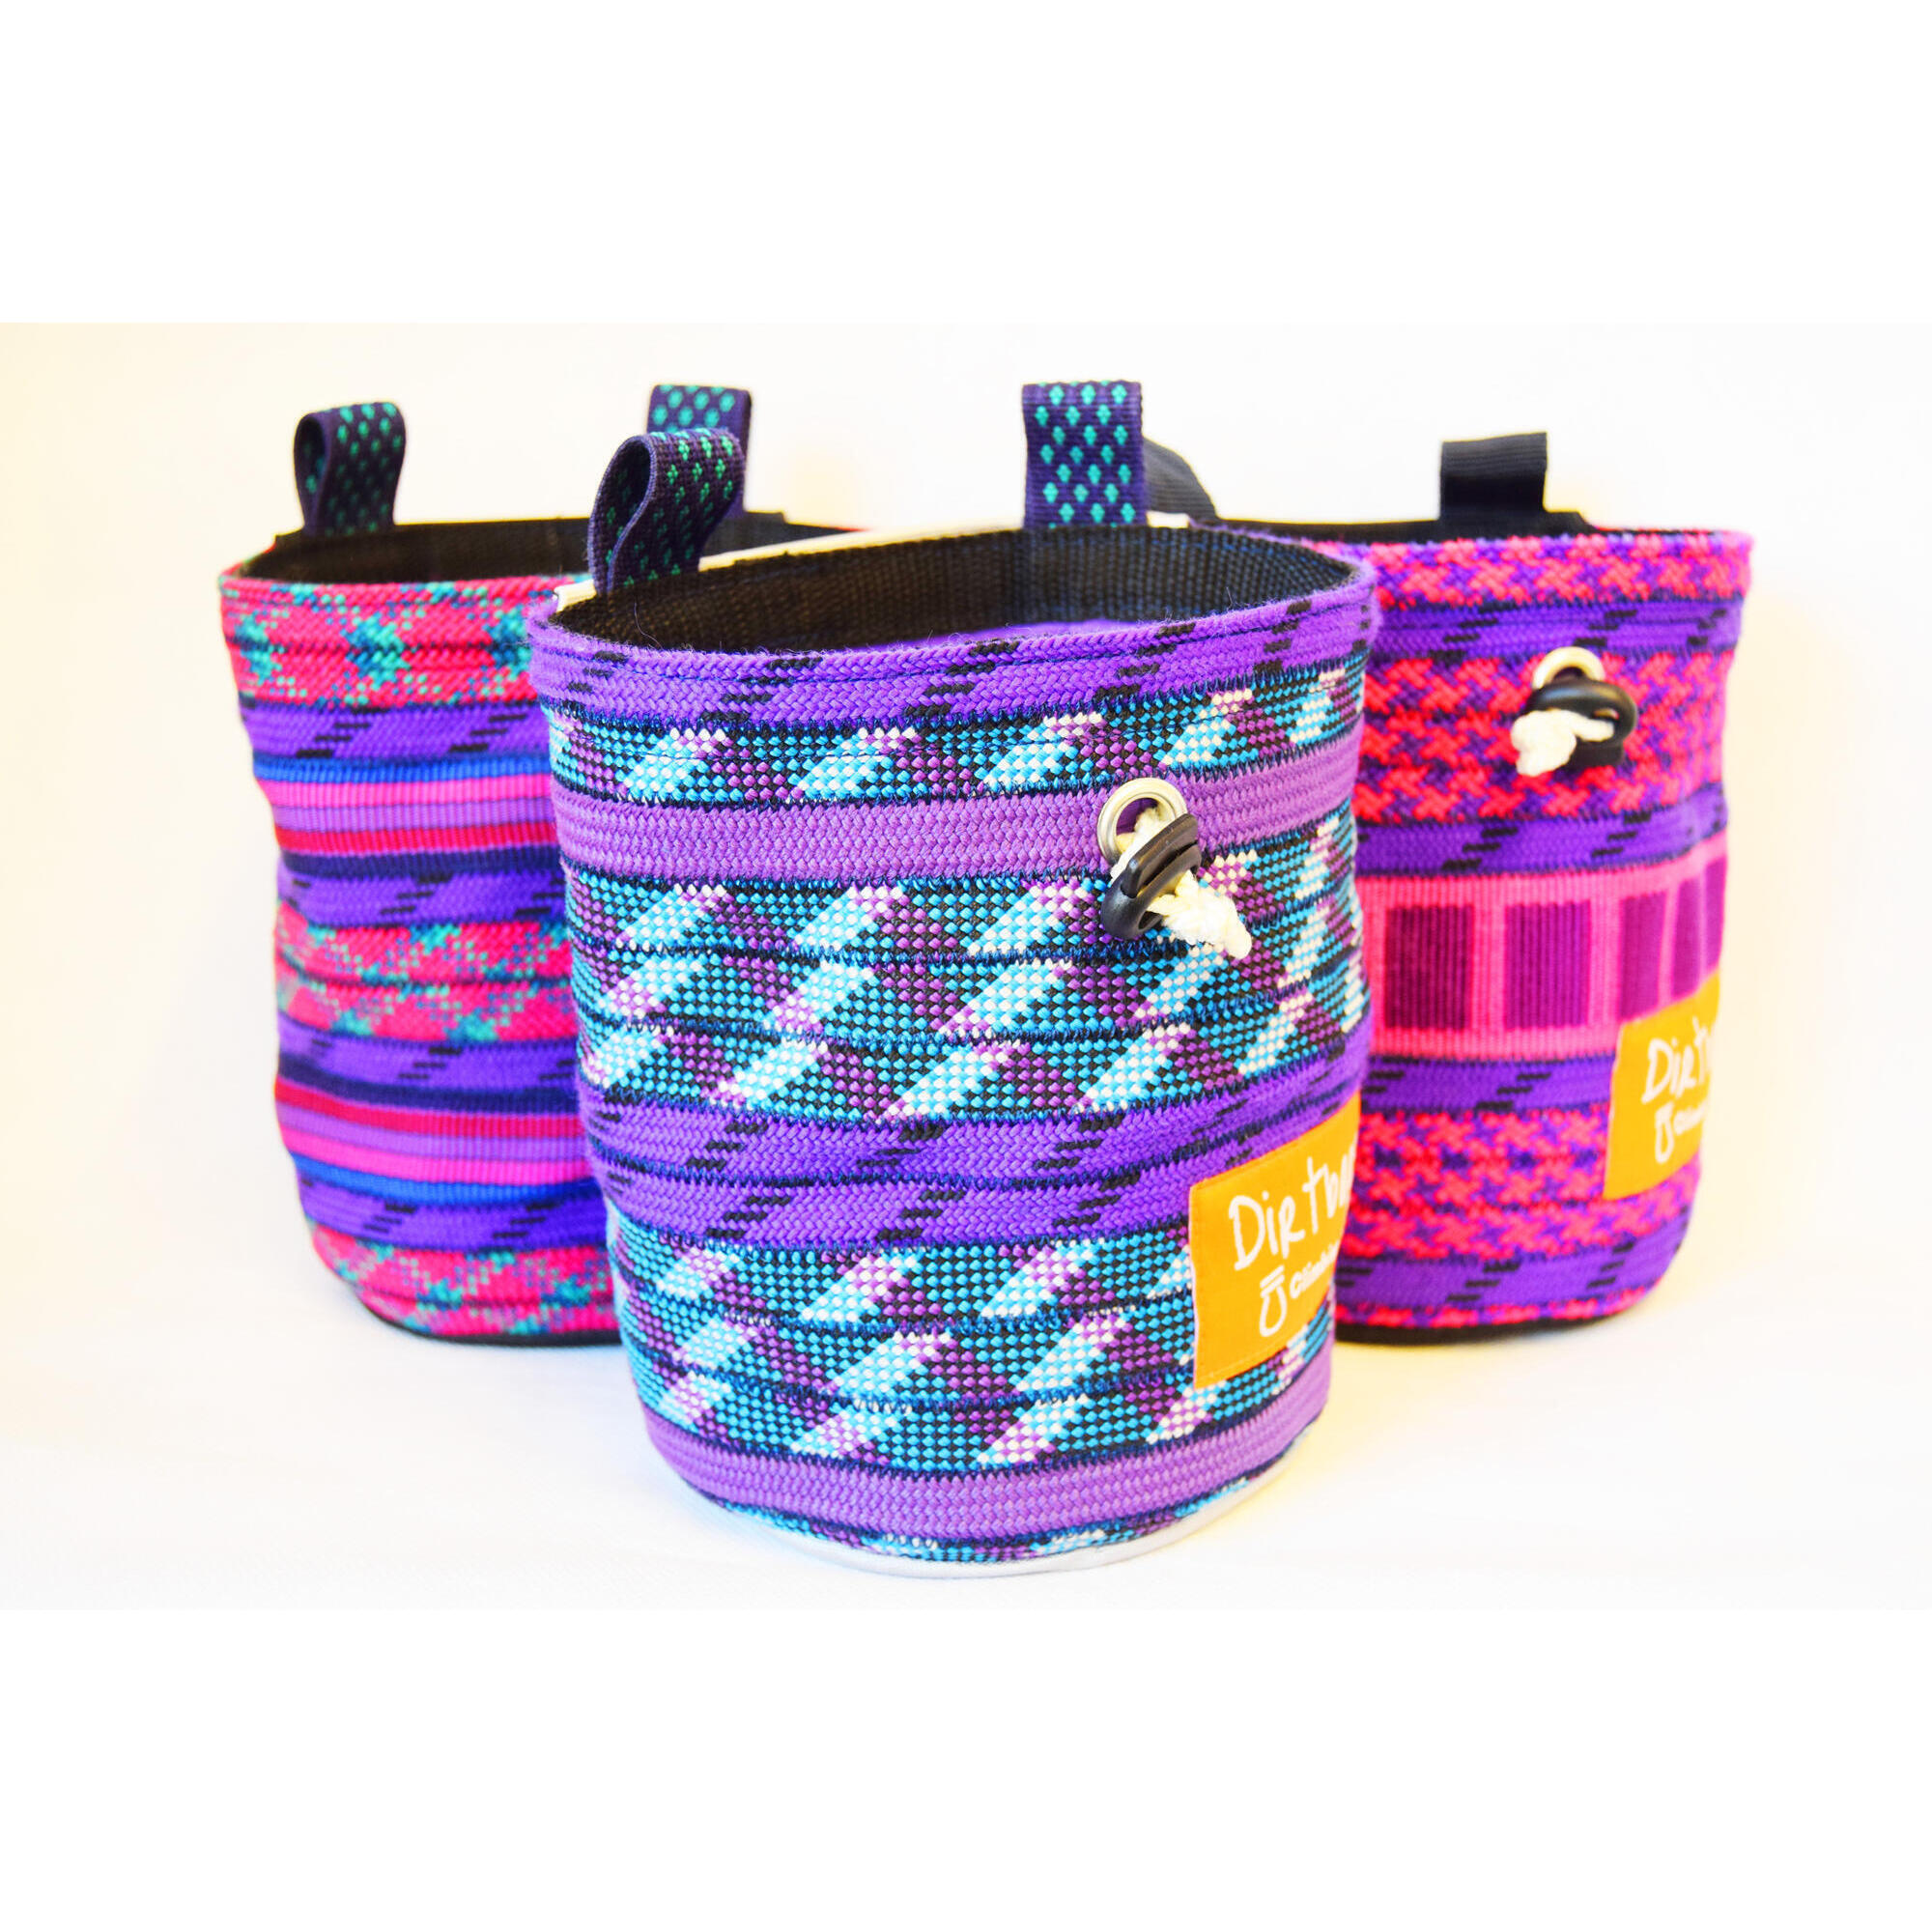 Recycled climbing rope chalk bag, made in the UK / Purple 1/4